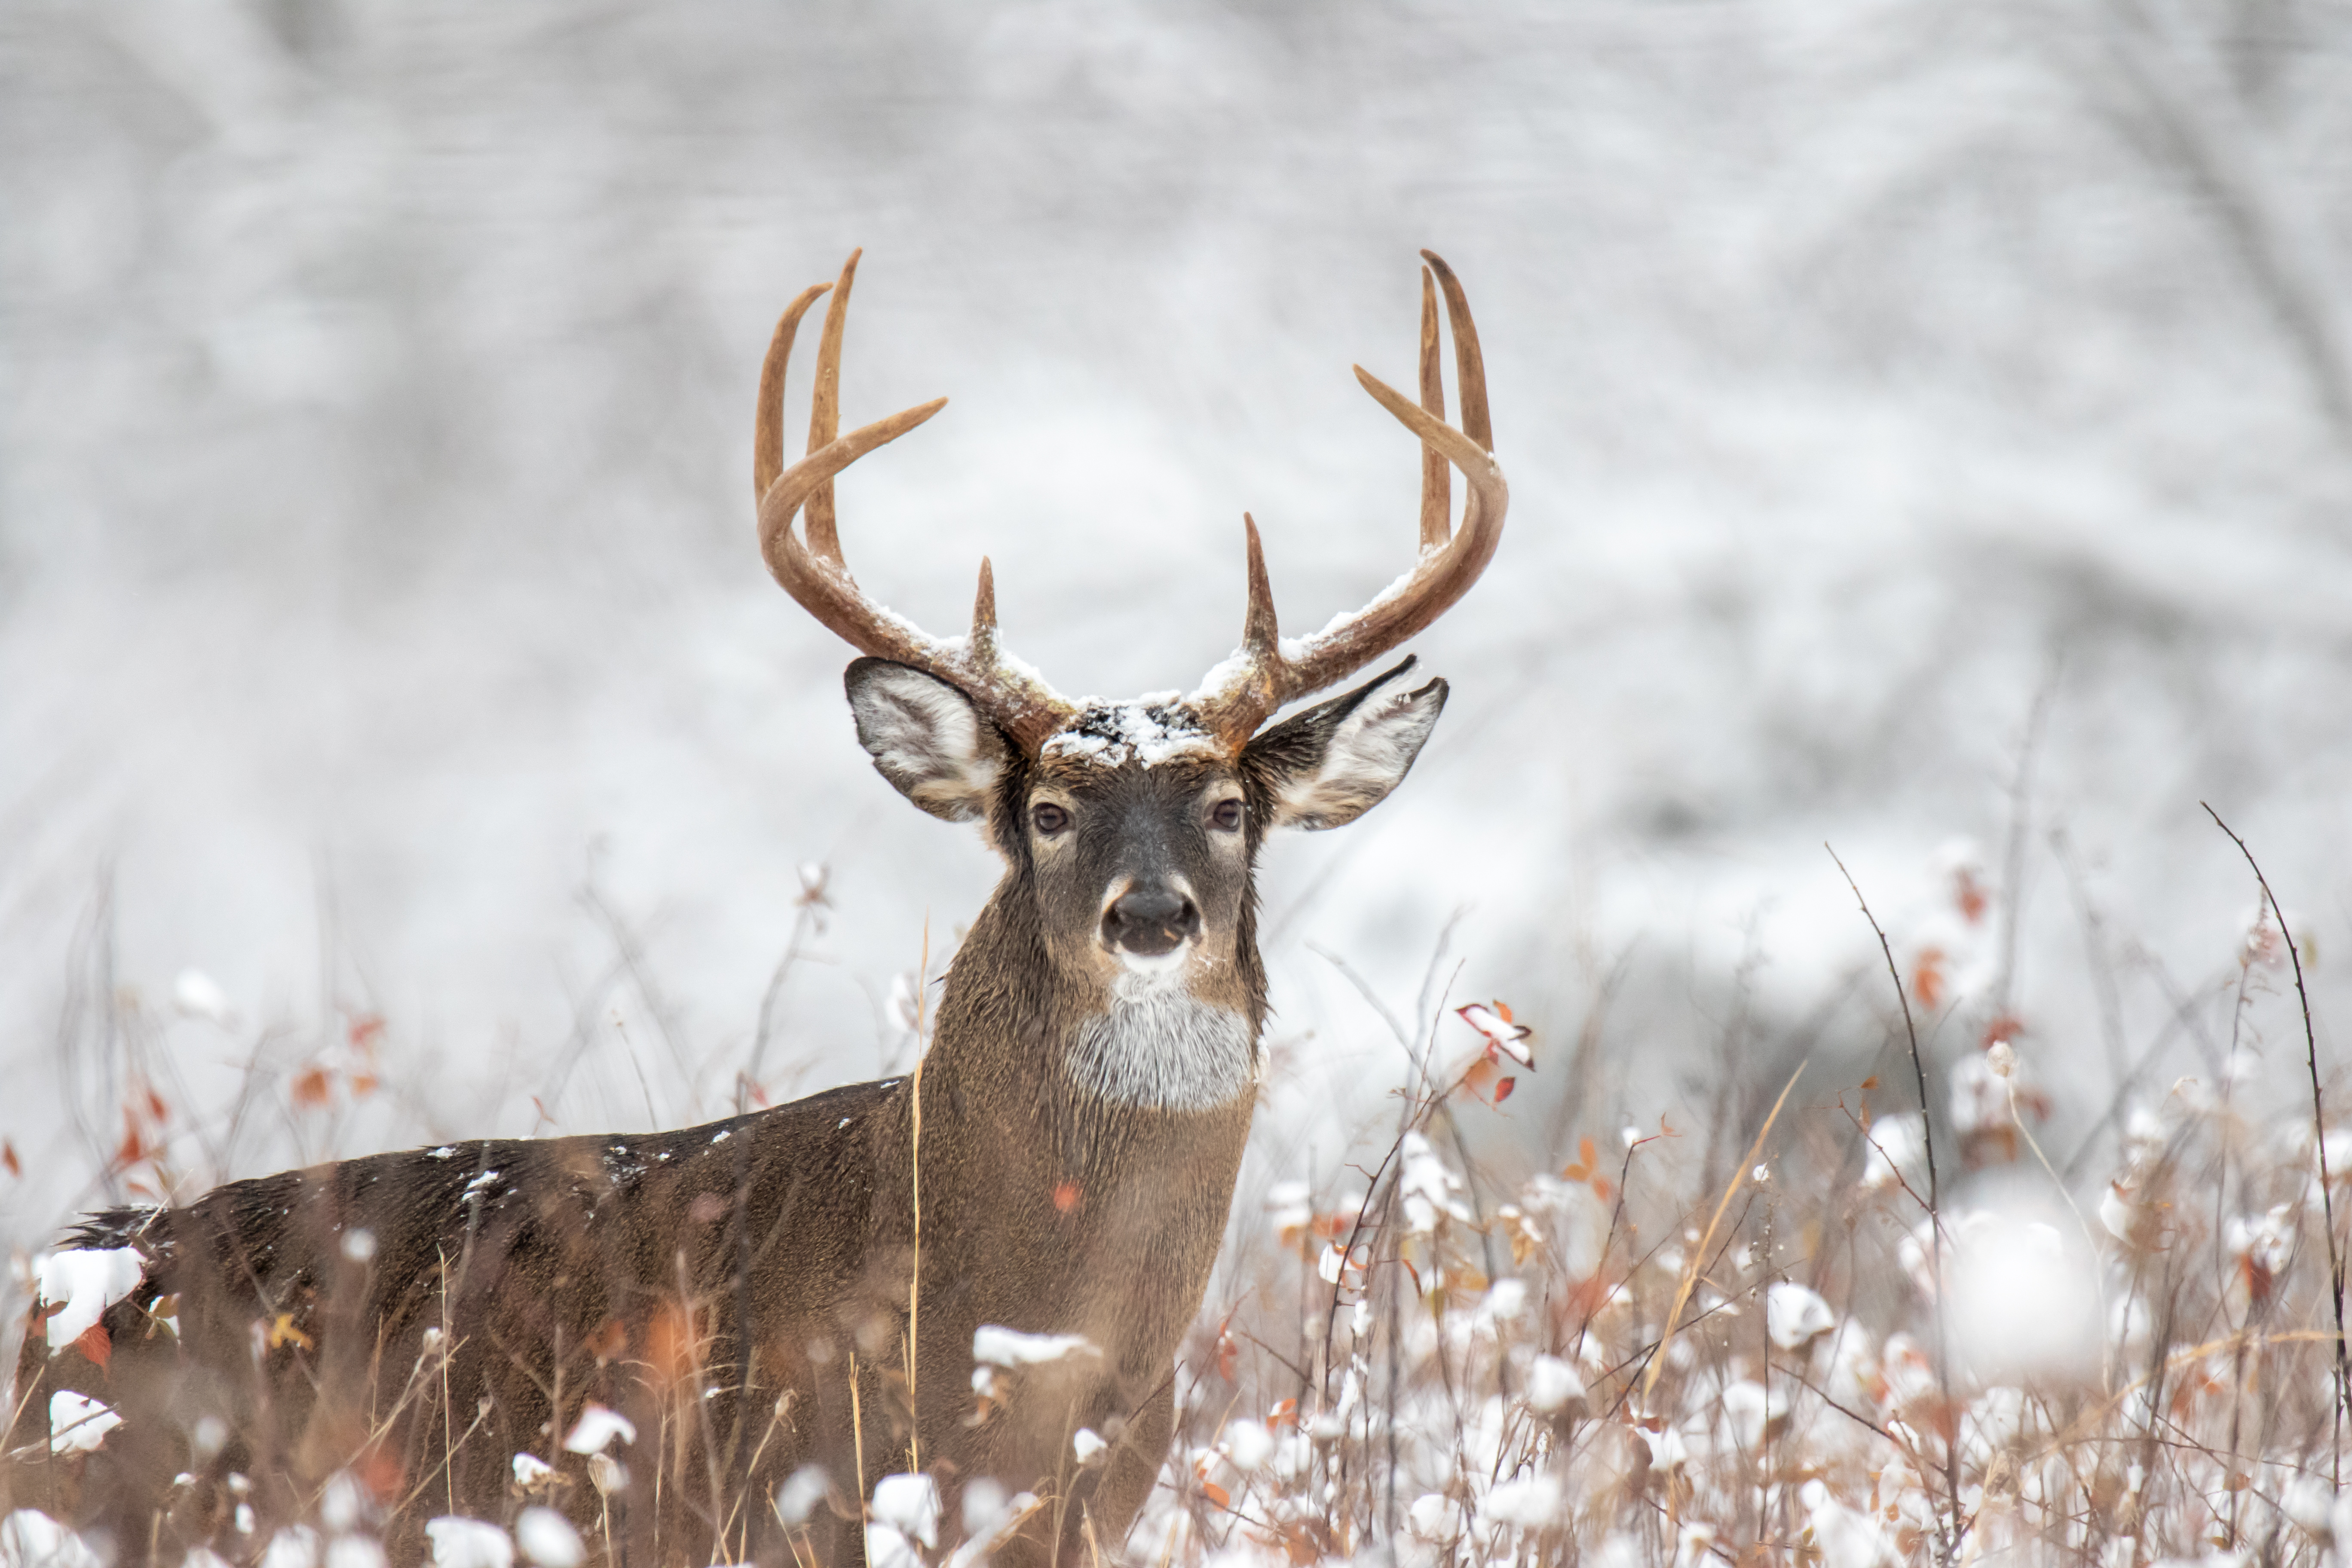 A whitetail deer in snowy conditions, hunter safety concept. 